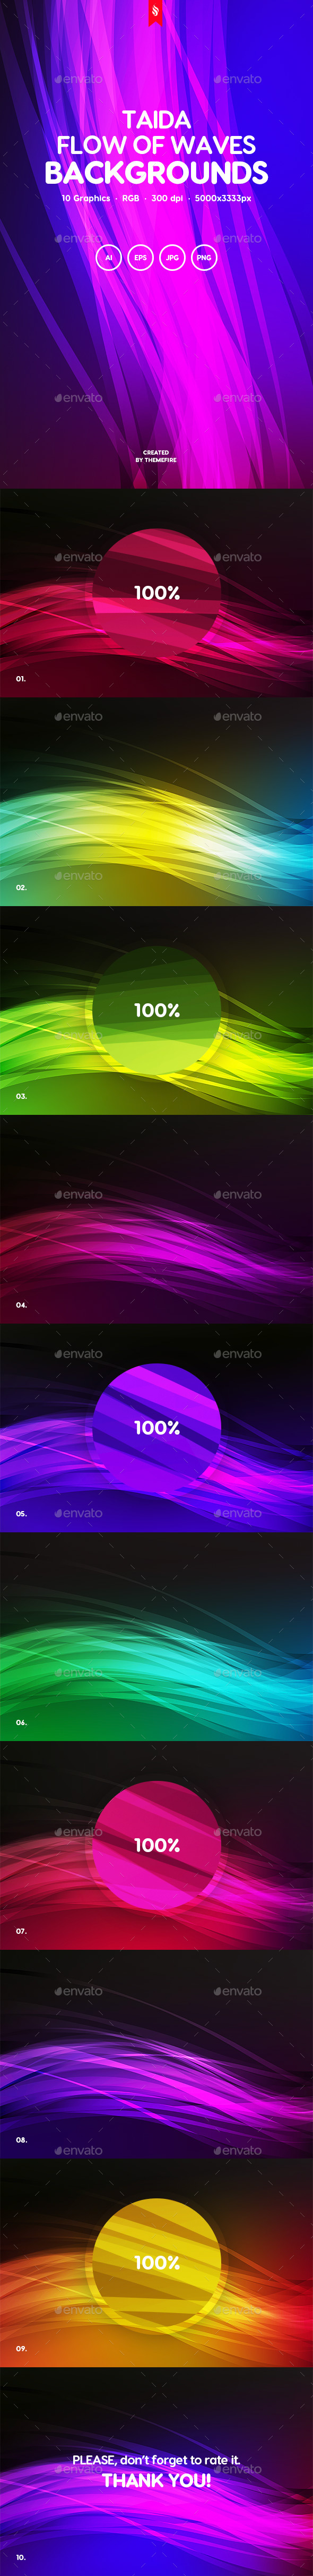 Taida - Abstract Flow of Waves Backgrounds